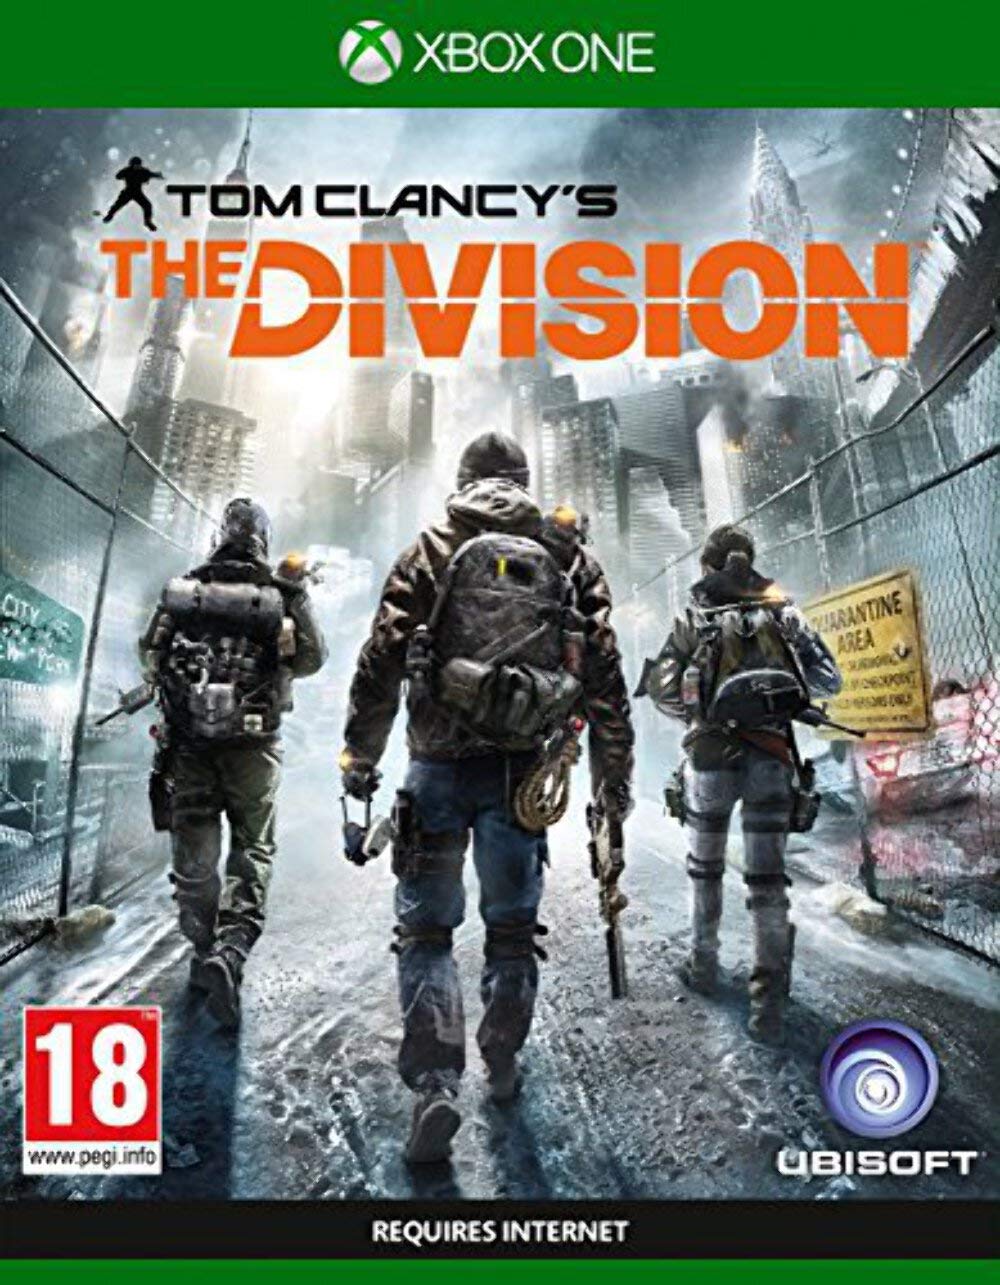 The Division XBONE